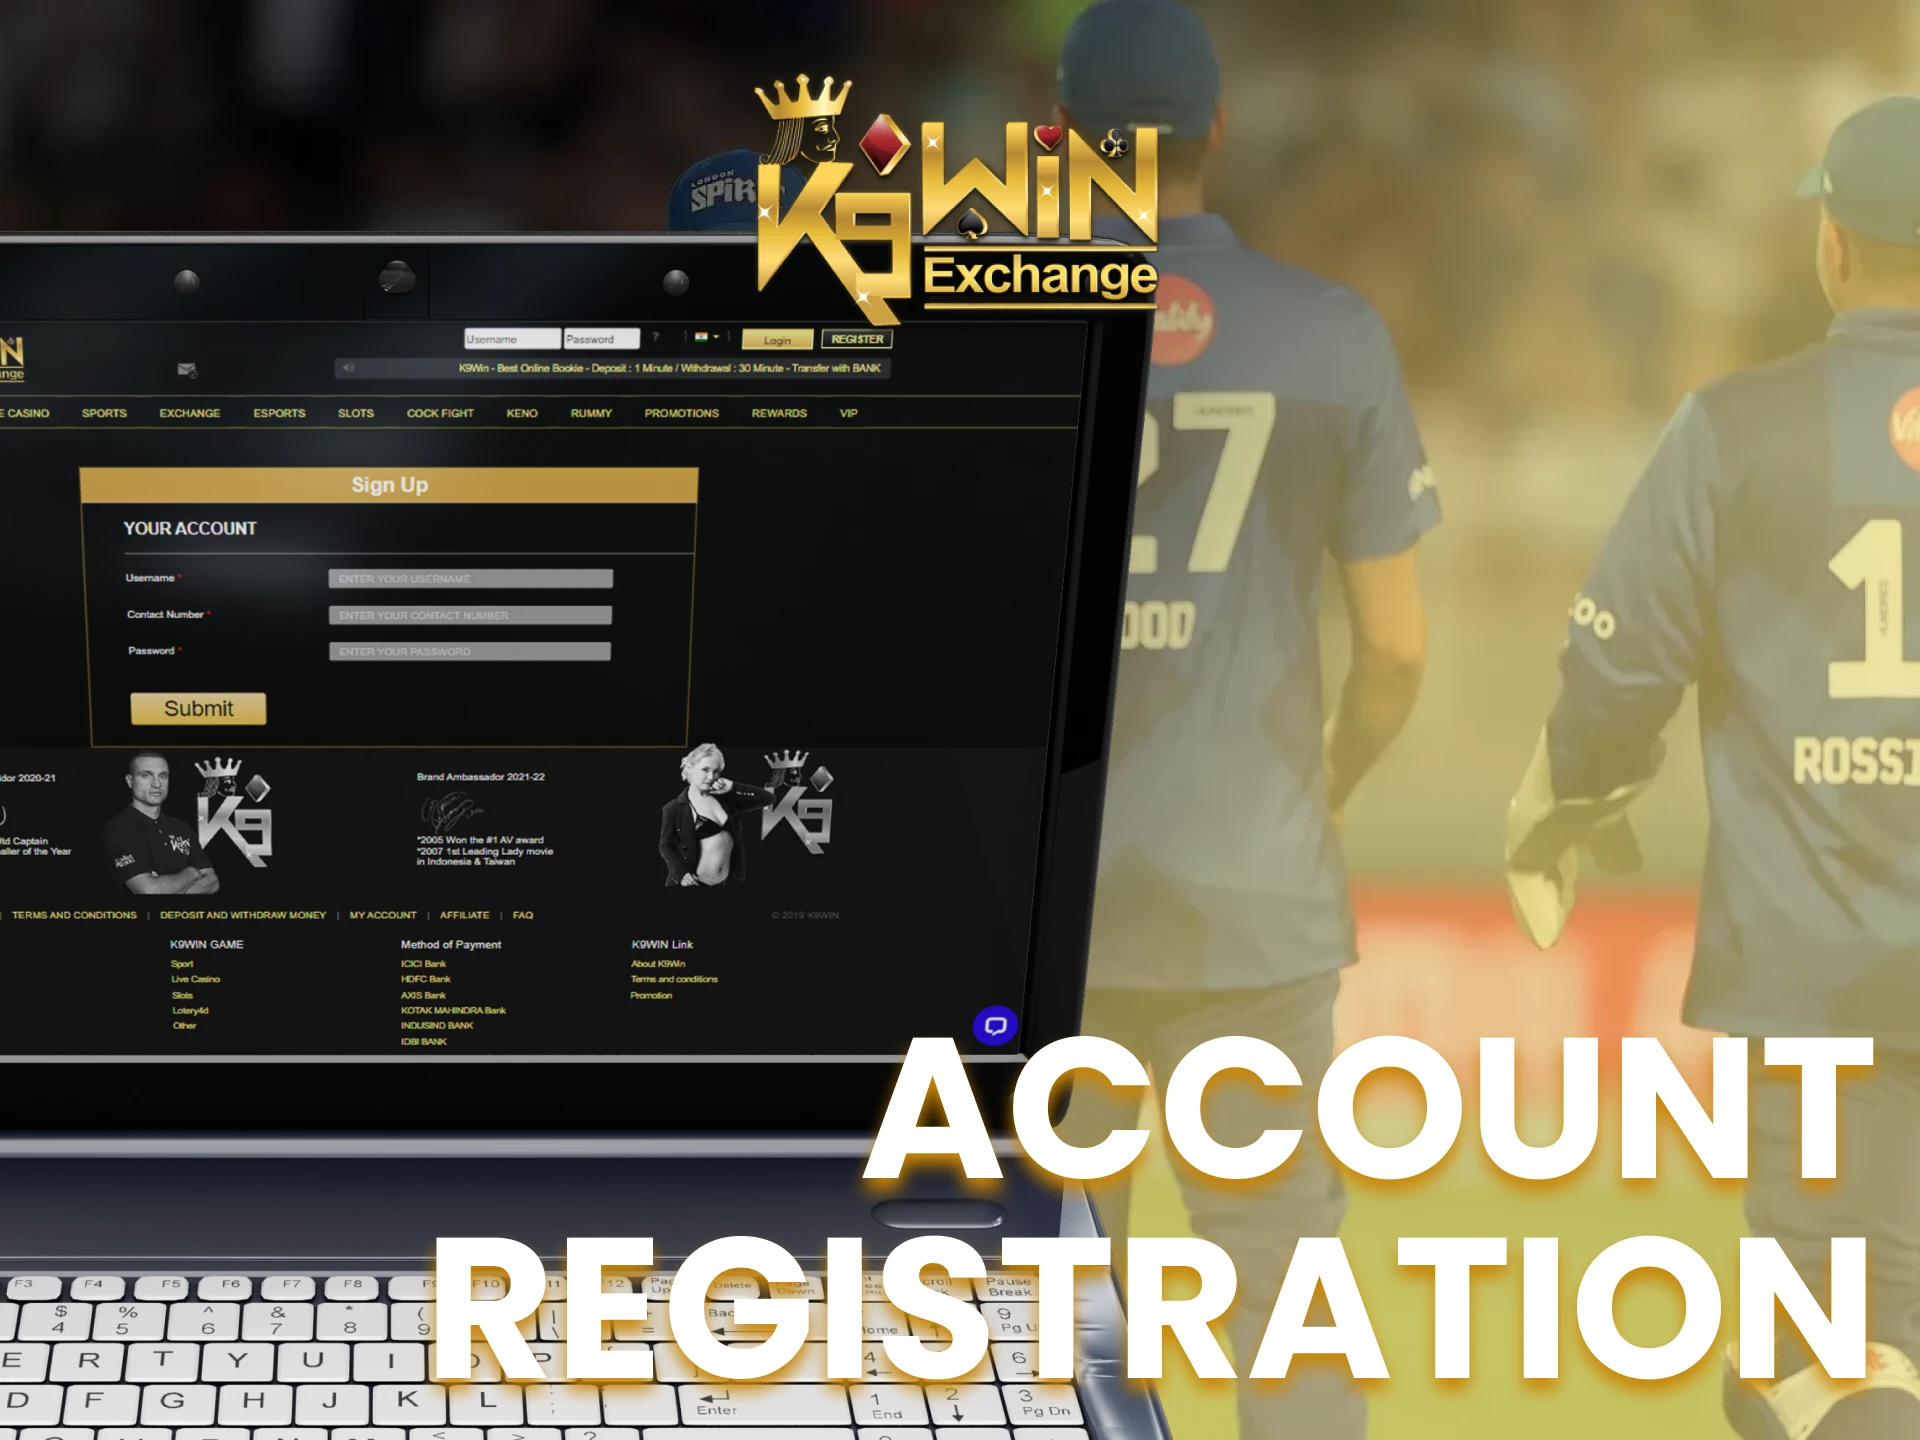 Register a new K9Win account on the registration page.